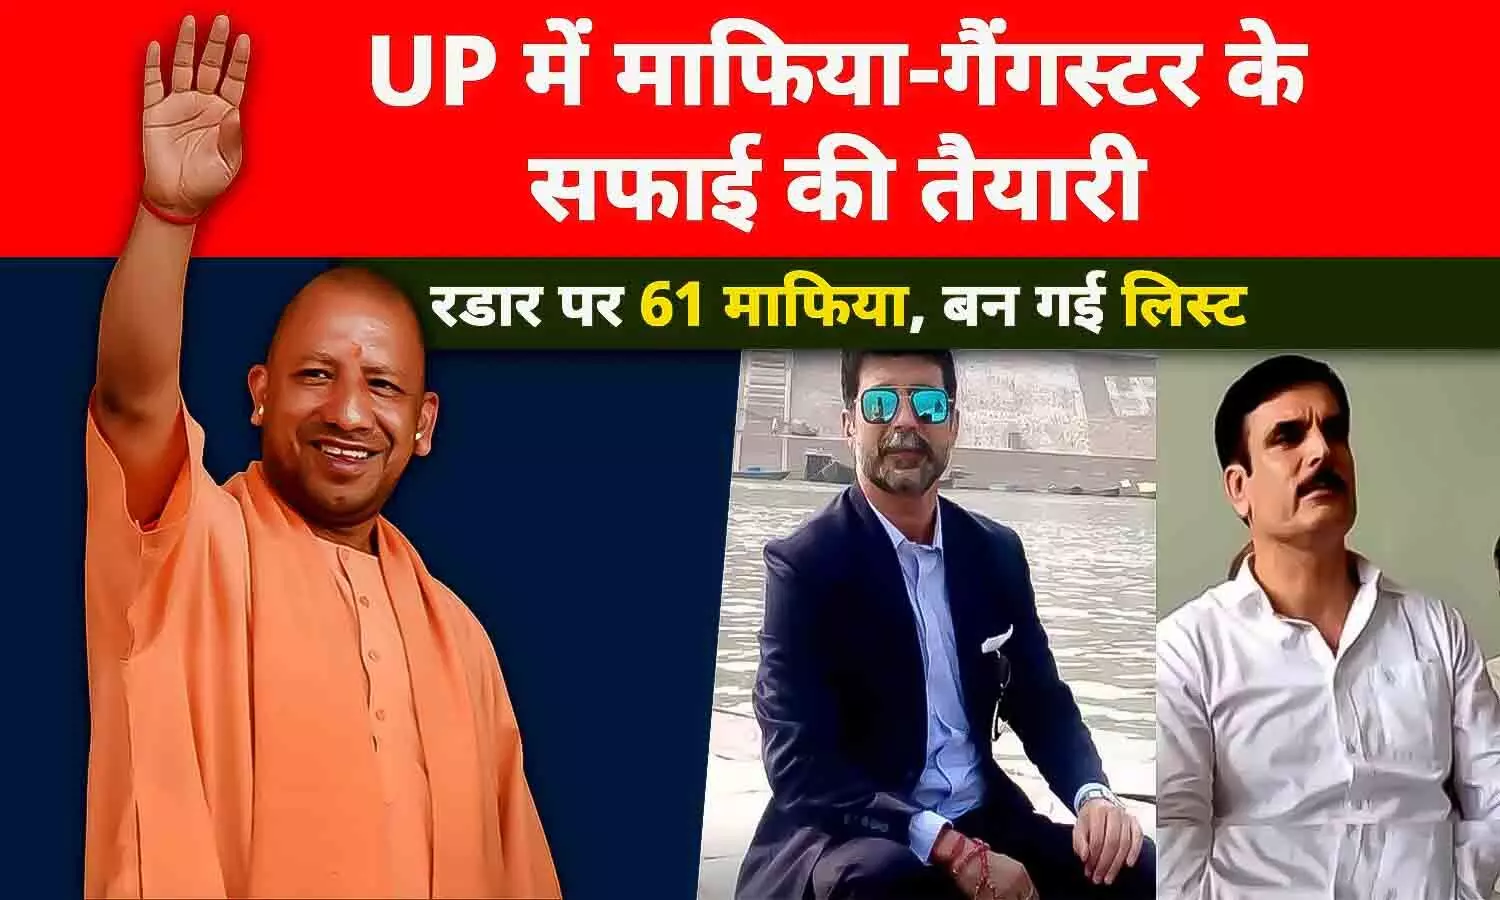 cleaning mafia-gangster in UP